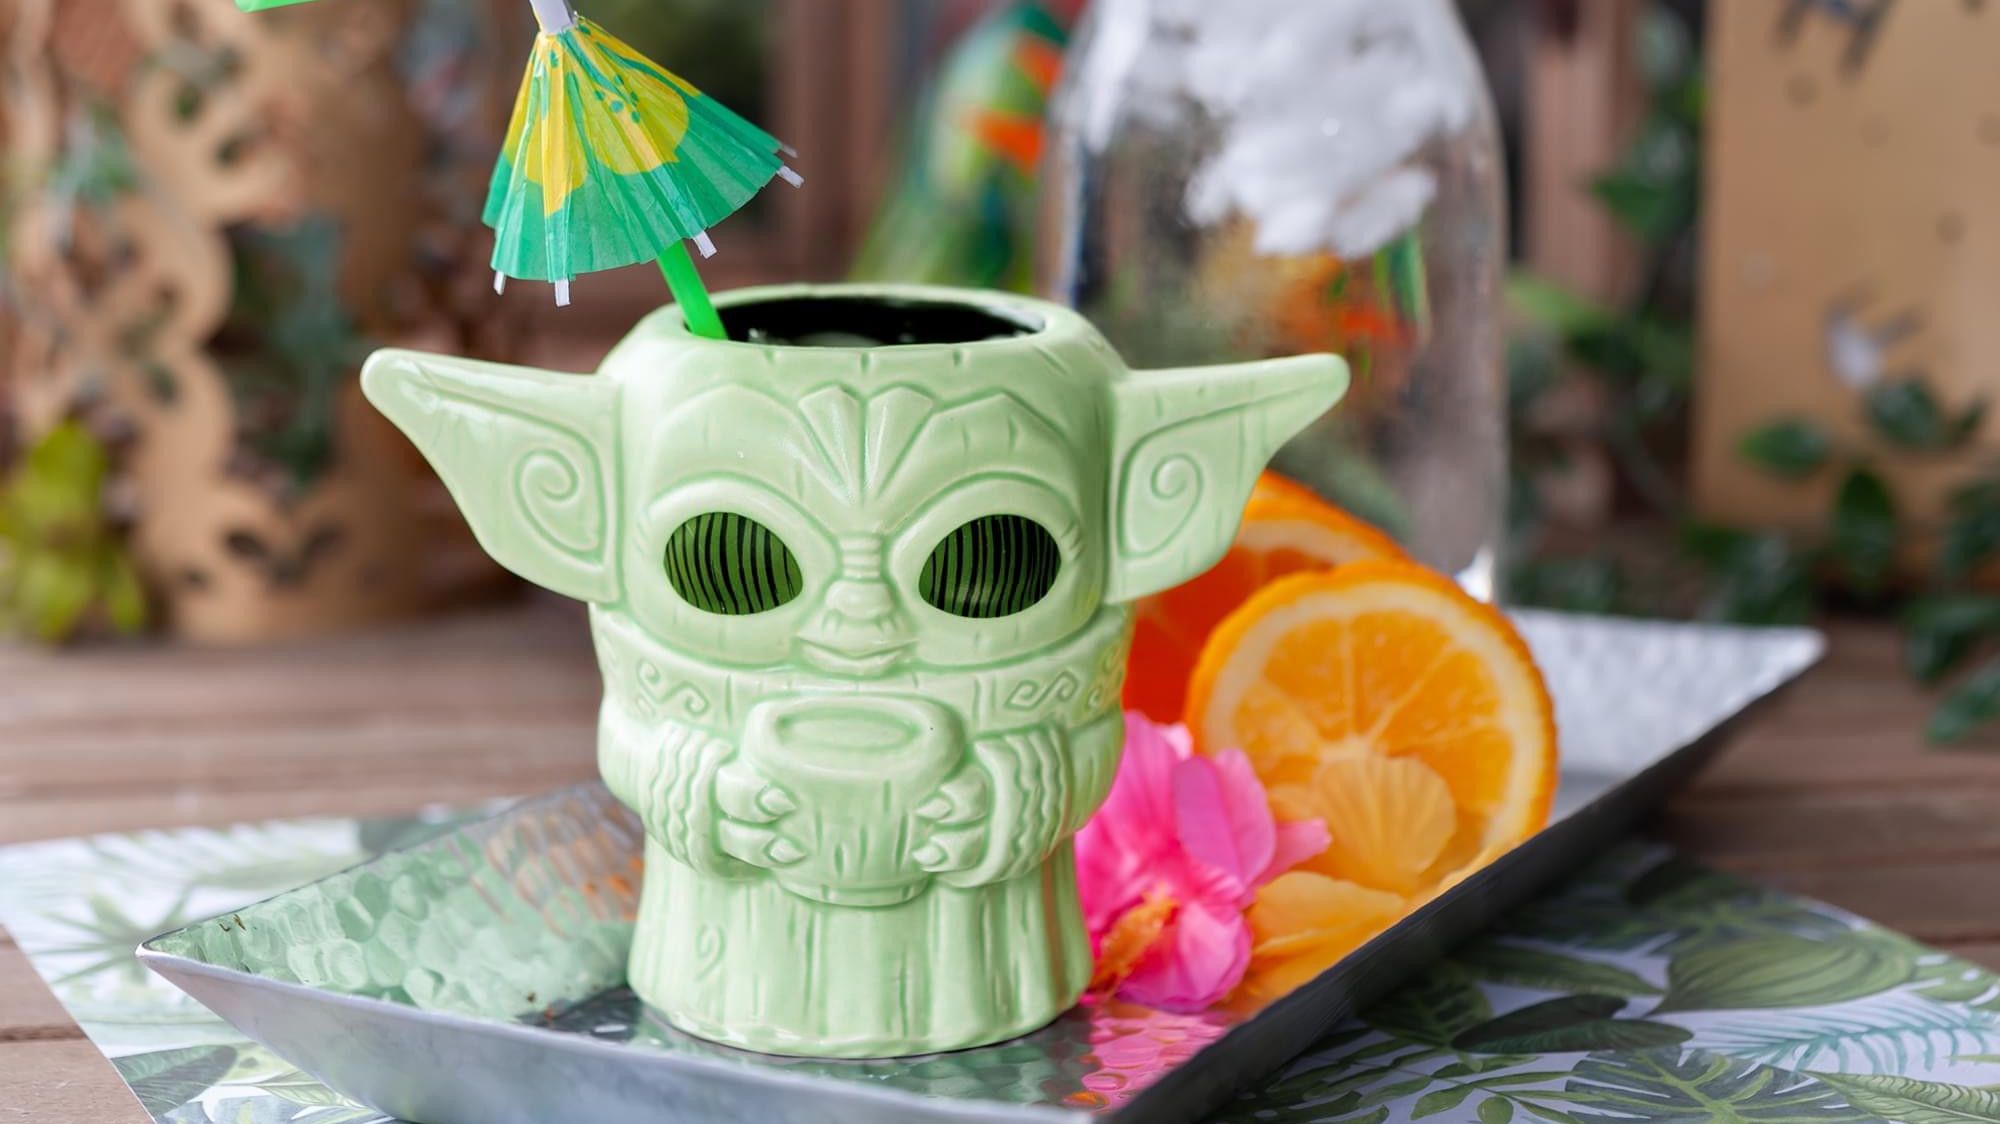 https://www.simplemost.com/wp-content/uploads/2020/07/baby-yoda-tiki-cup-colorful.jpg